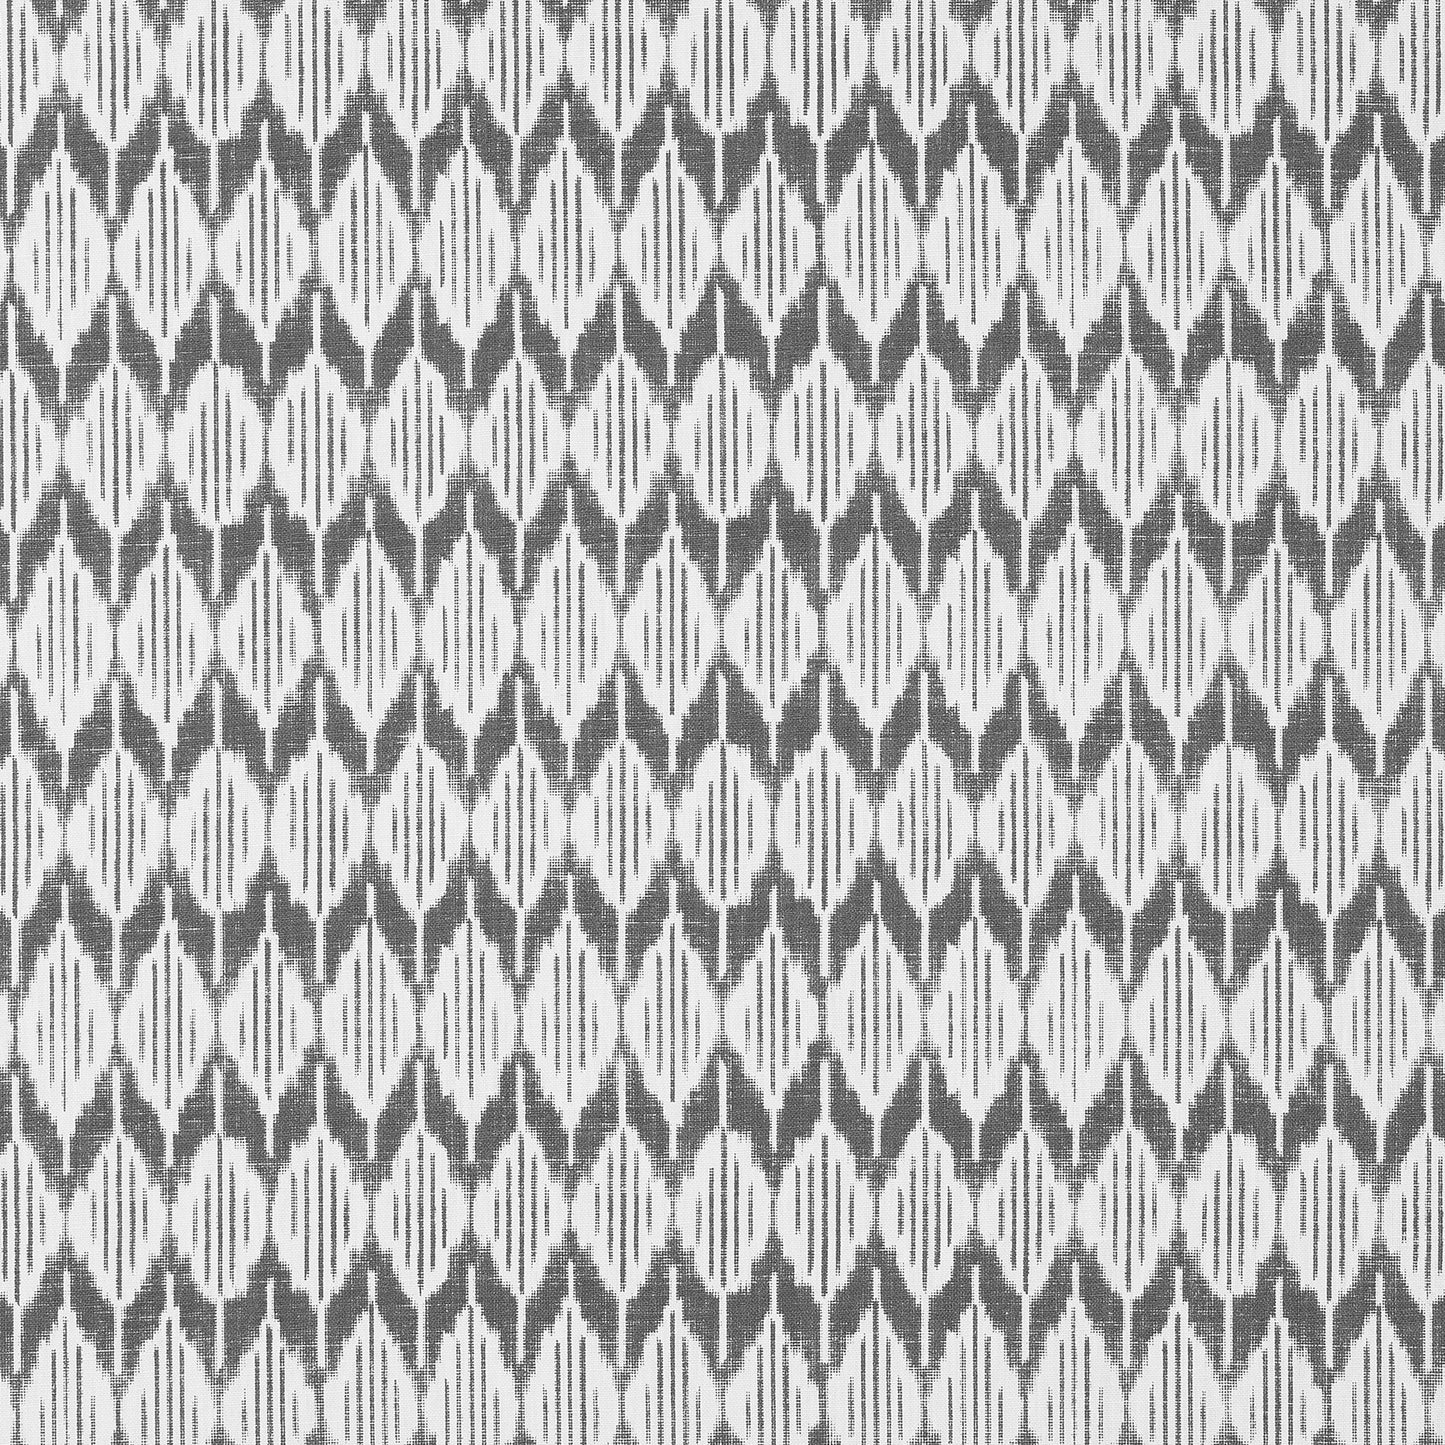 Purchase  Ann French Fabric SKU# AF73020  pattern name  Balin Ikat